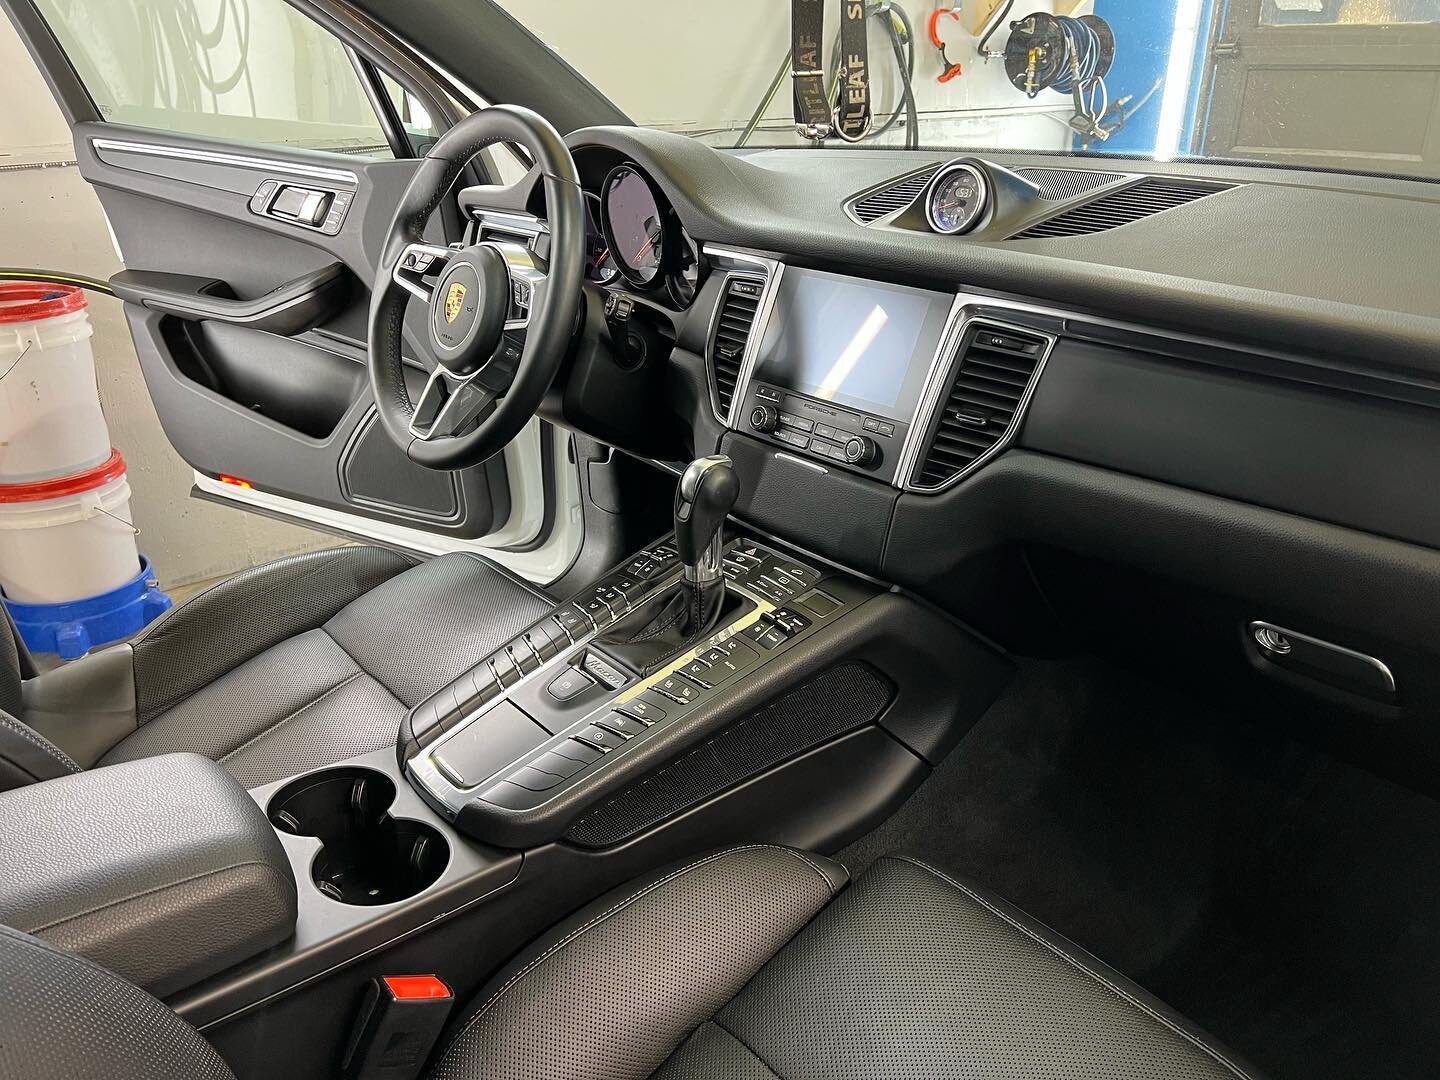 Why waste time in line, when we come straight to you? ✨

CALL, TEXT, or DM today to book your next appointment!
📞📲 778-212-4994

🚘: Porsche Macan with an interior detail
#icsmobiledetailing #okanagancars #porsche #porschemacan #porschecanada